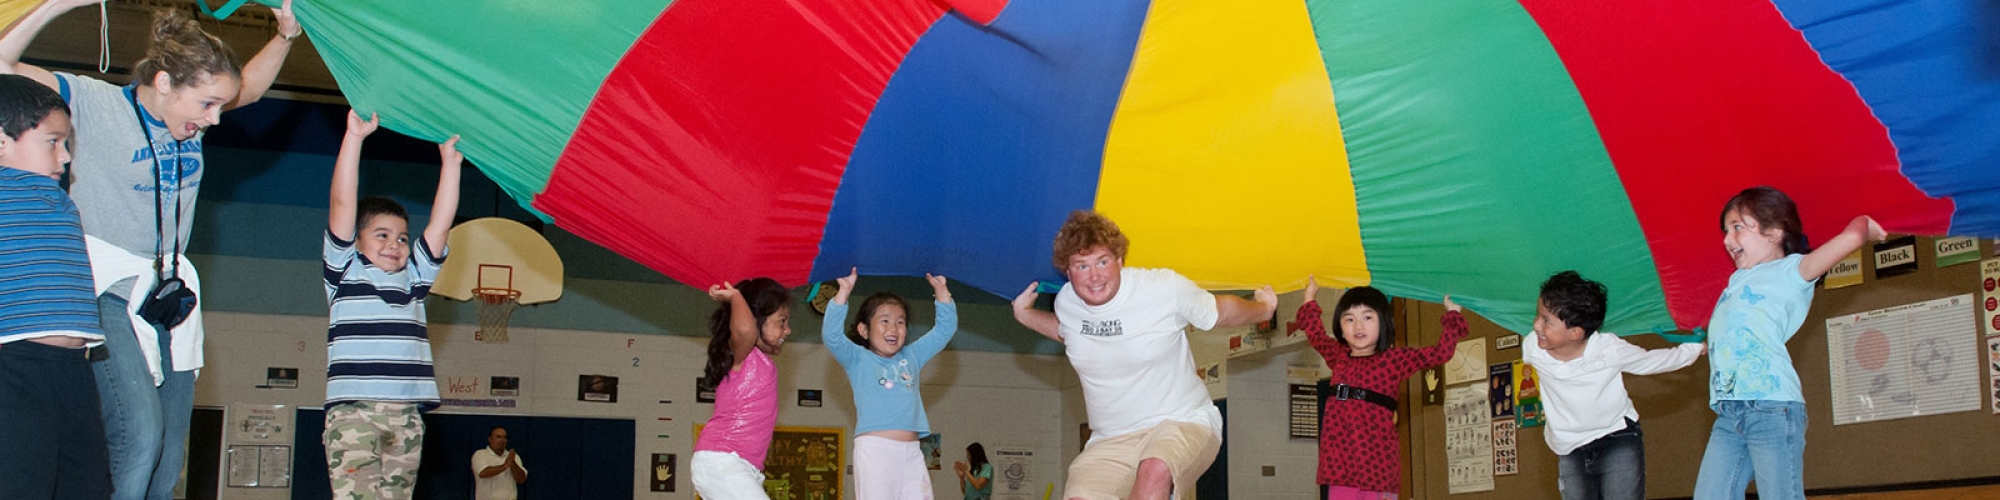 Students with a parachute in physical education class